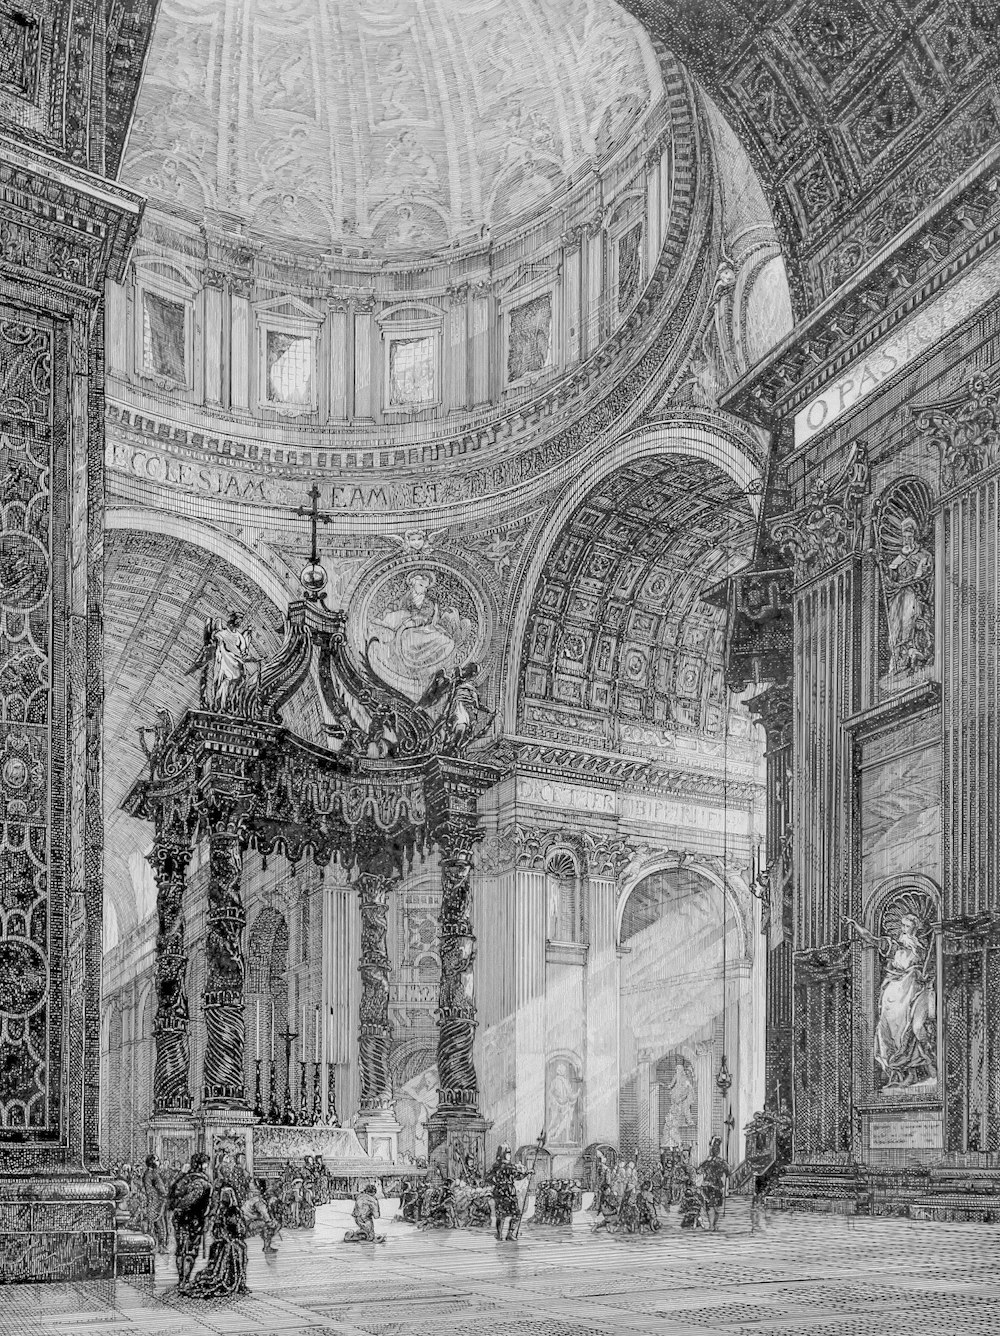 a drawing of a large building with a domed ceiling